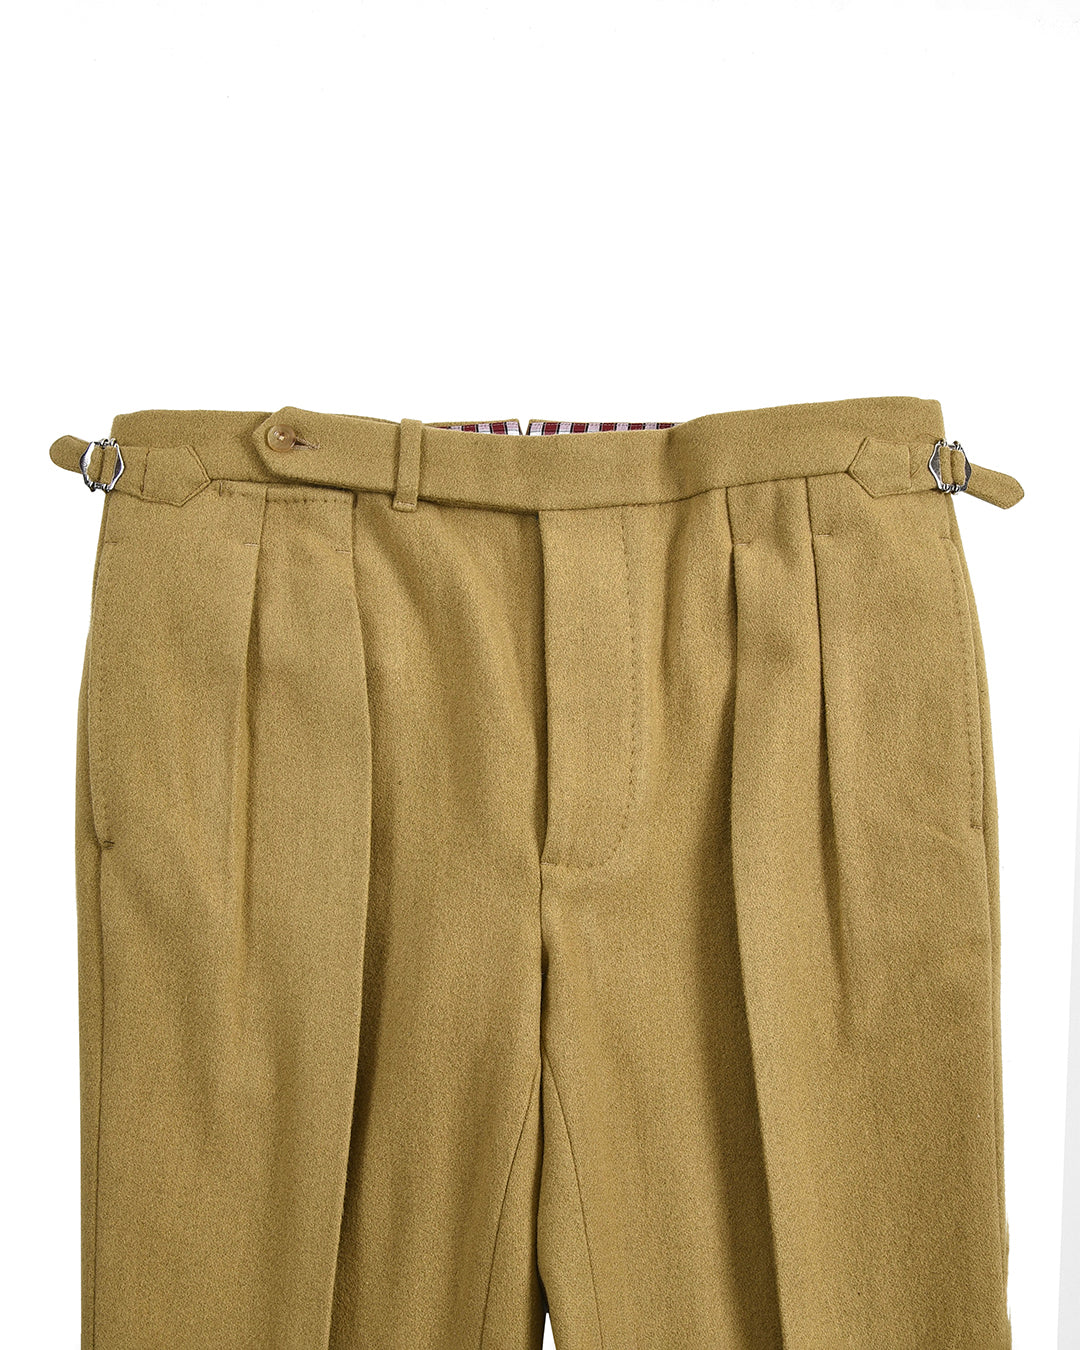 Washable Wool Pants: Camel Wool Rich Flannel High Waisted Pant